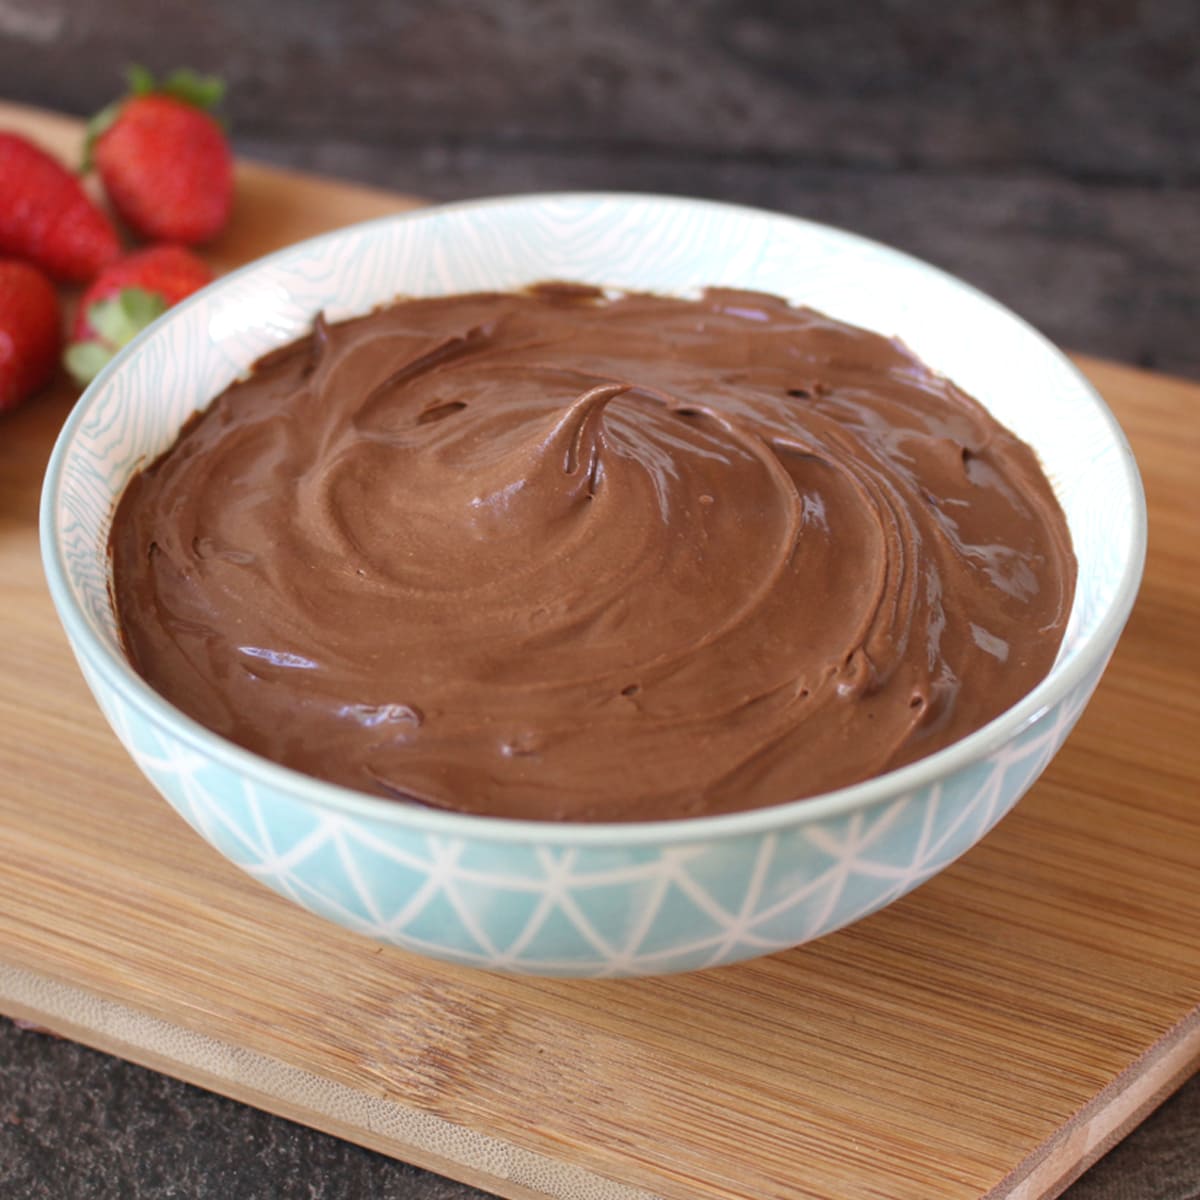 Mousse in a small bowl